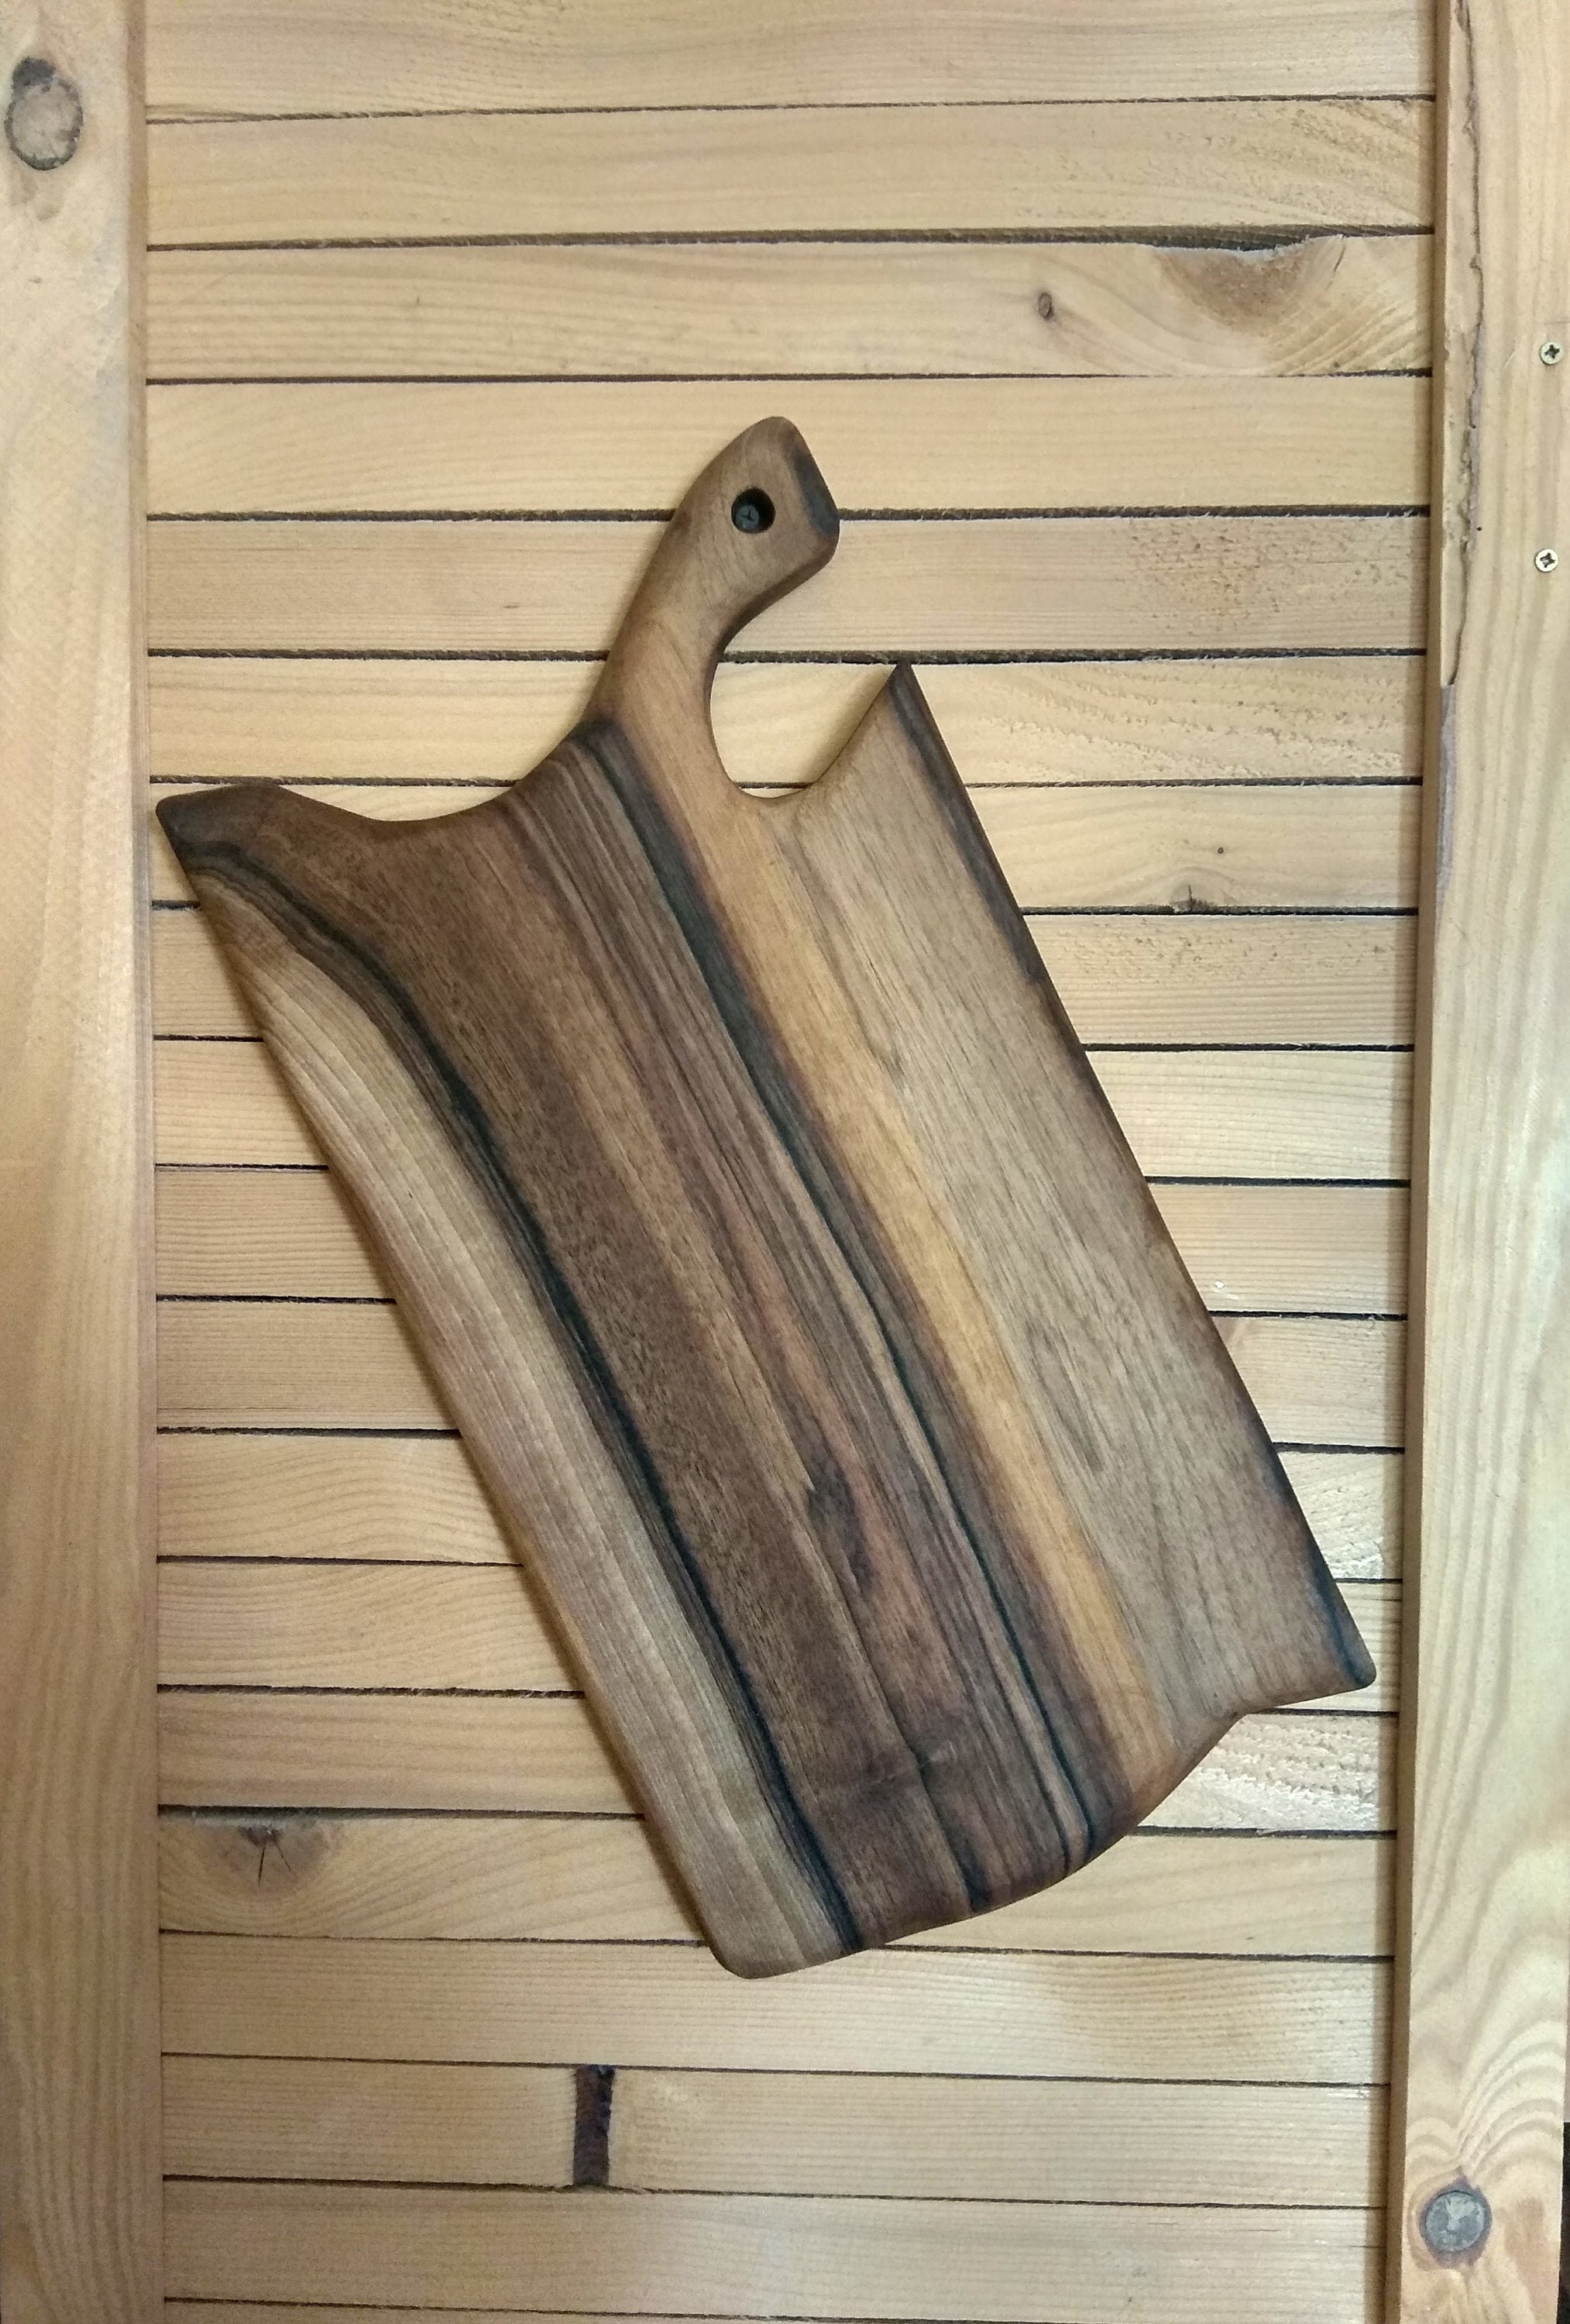 Thick Wood Cutting Board with Handles - Artisraw